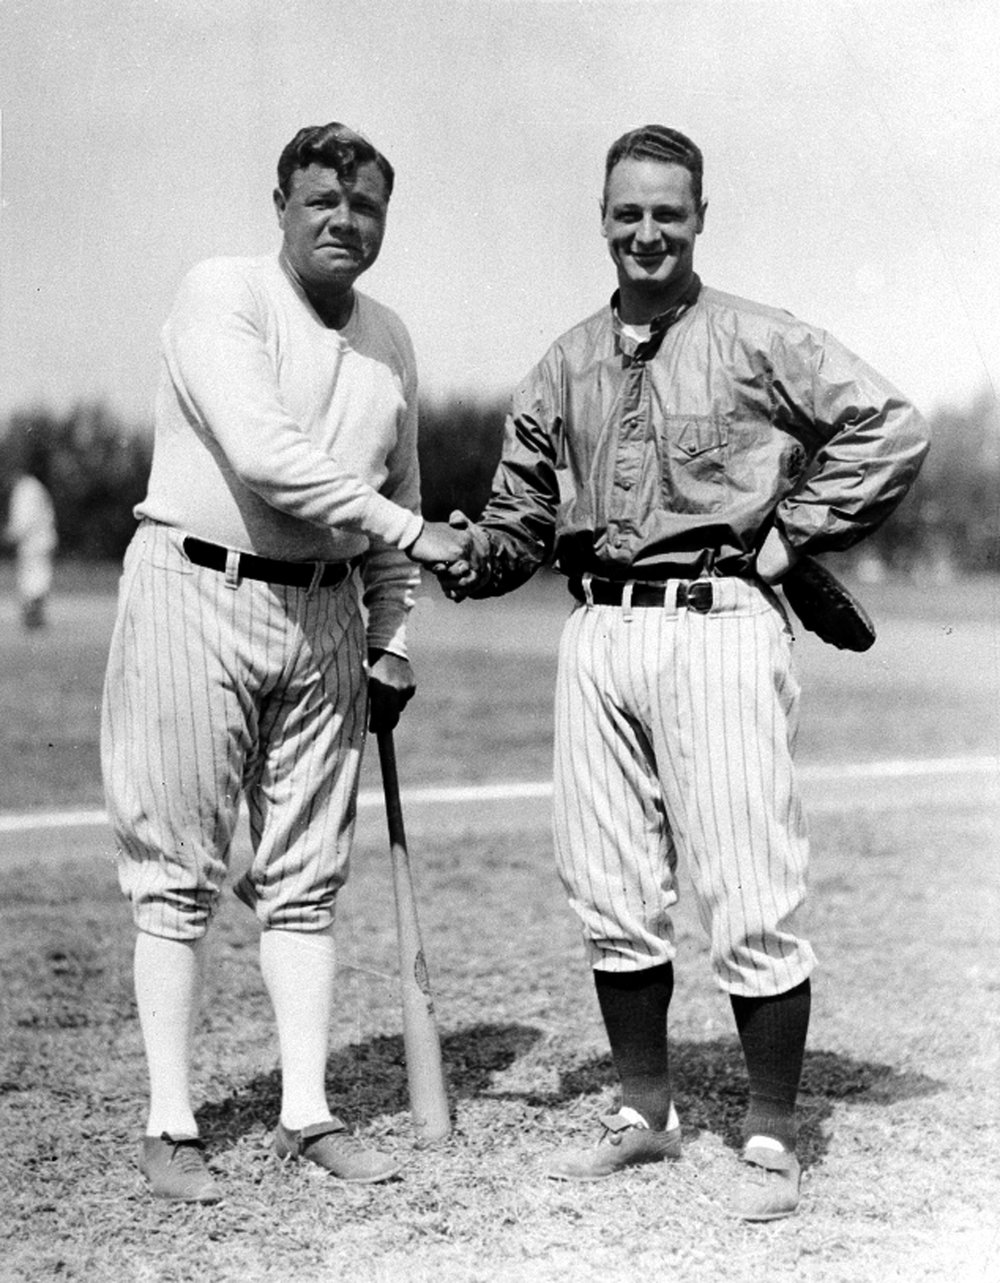  New York Yankees players Babe Ruth, left, and Lou Gehrig shake hands at the Yankee training camp at St. Petersburg, Fla., March 14, 1933.  Gehrig, first baseman, is signed up with the clubhouse, but Ruth has yet to have his salary approved by owner 